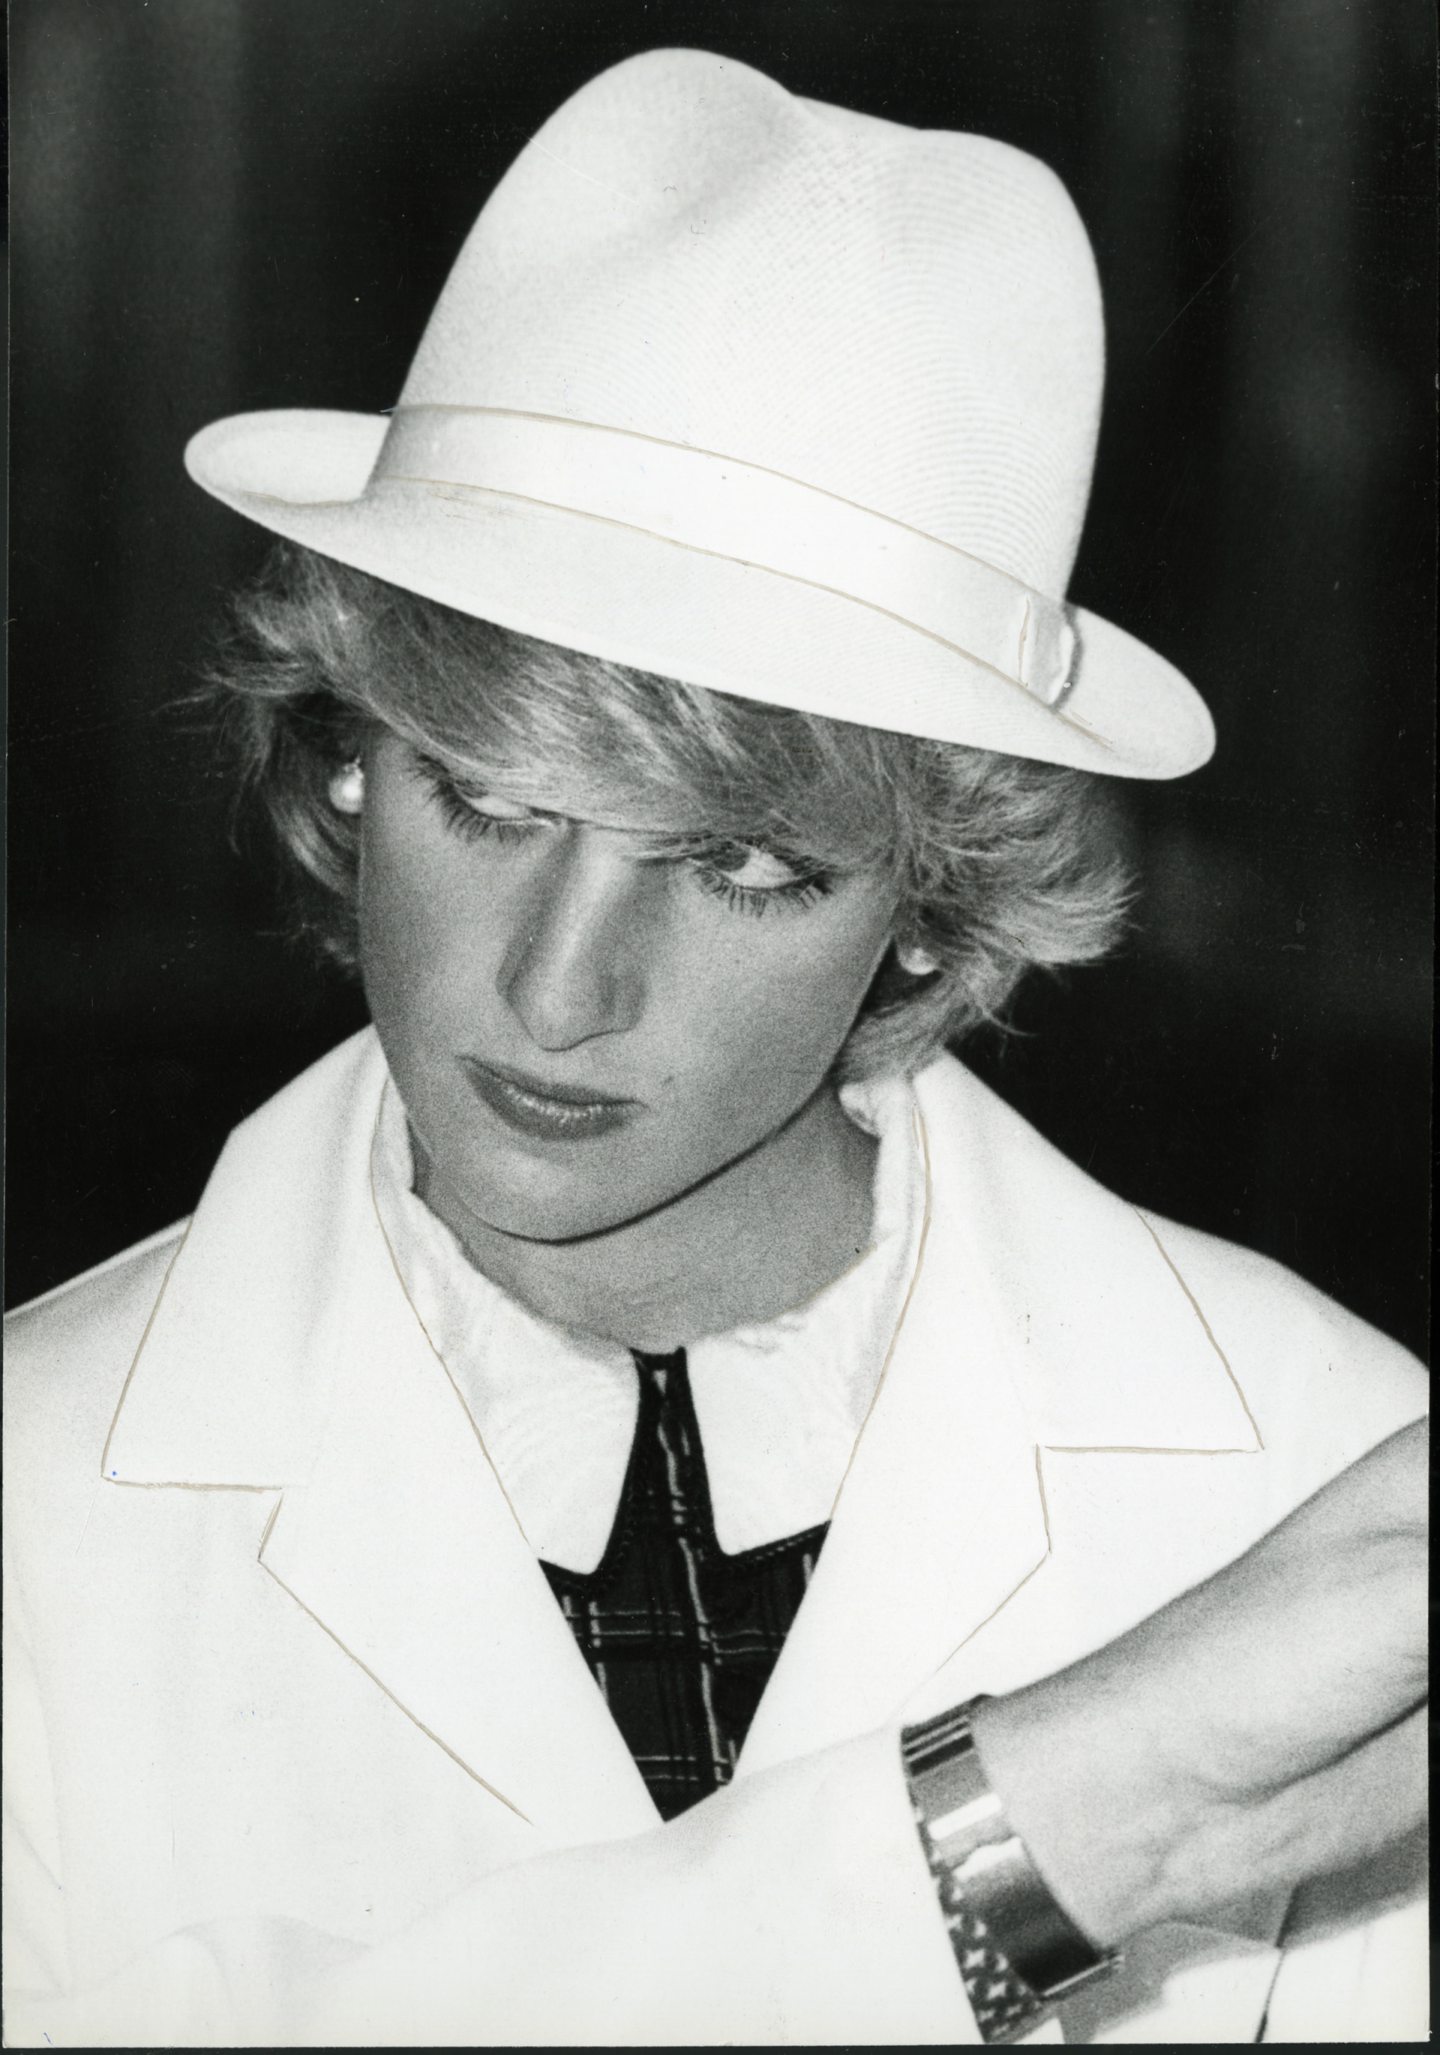 Diana, Princess of Wales, wearing a white work hat on her visit to the Keiller Factory in Mains Loan in 1983.